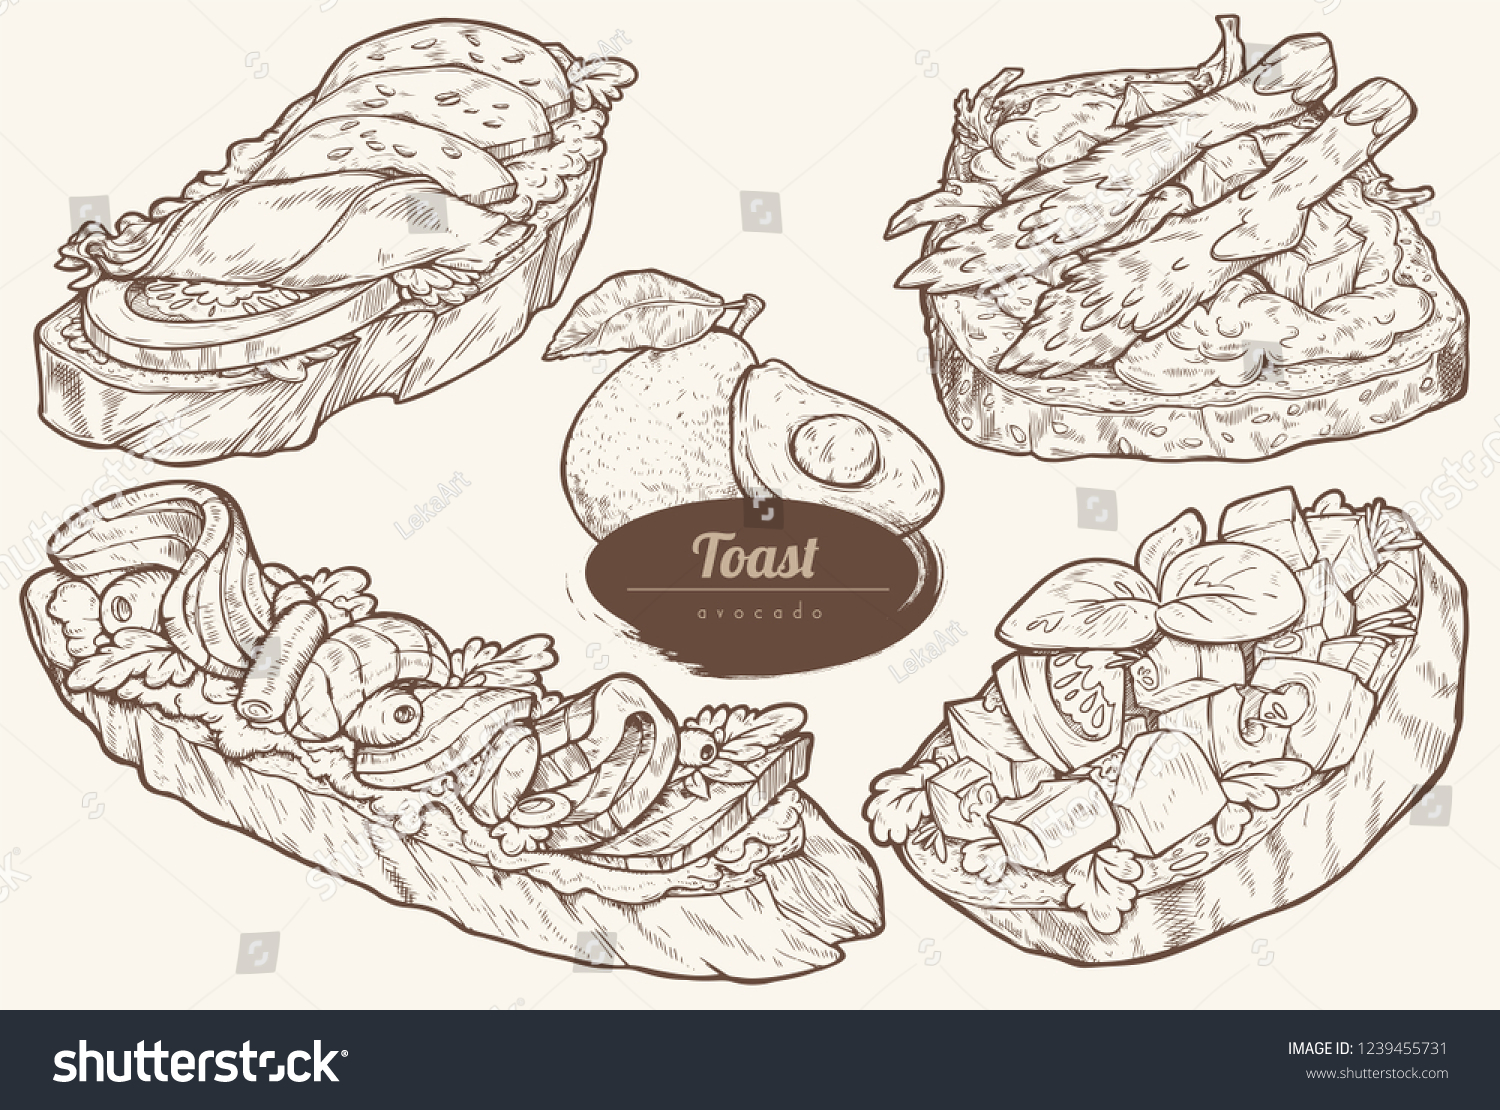 SVG of Avocado toasts with different toppings. Healthy breakfast meal. Set of vector illustrations isolated on light background. Hand drawn. Vintage style. svg